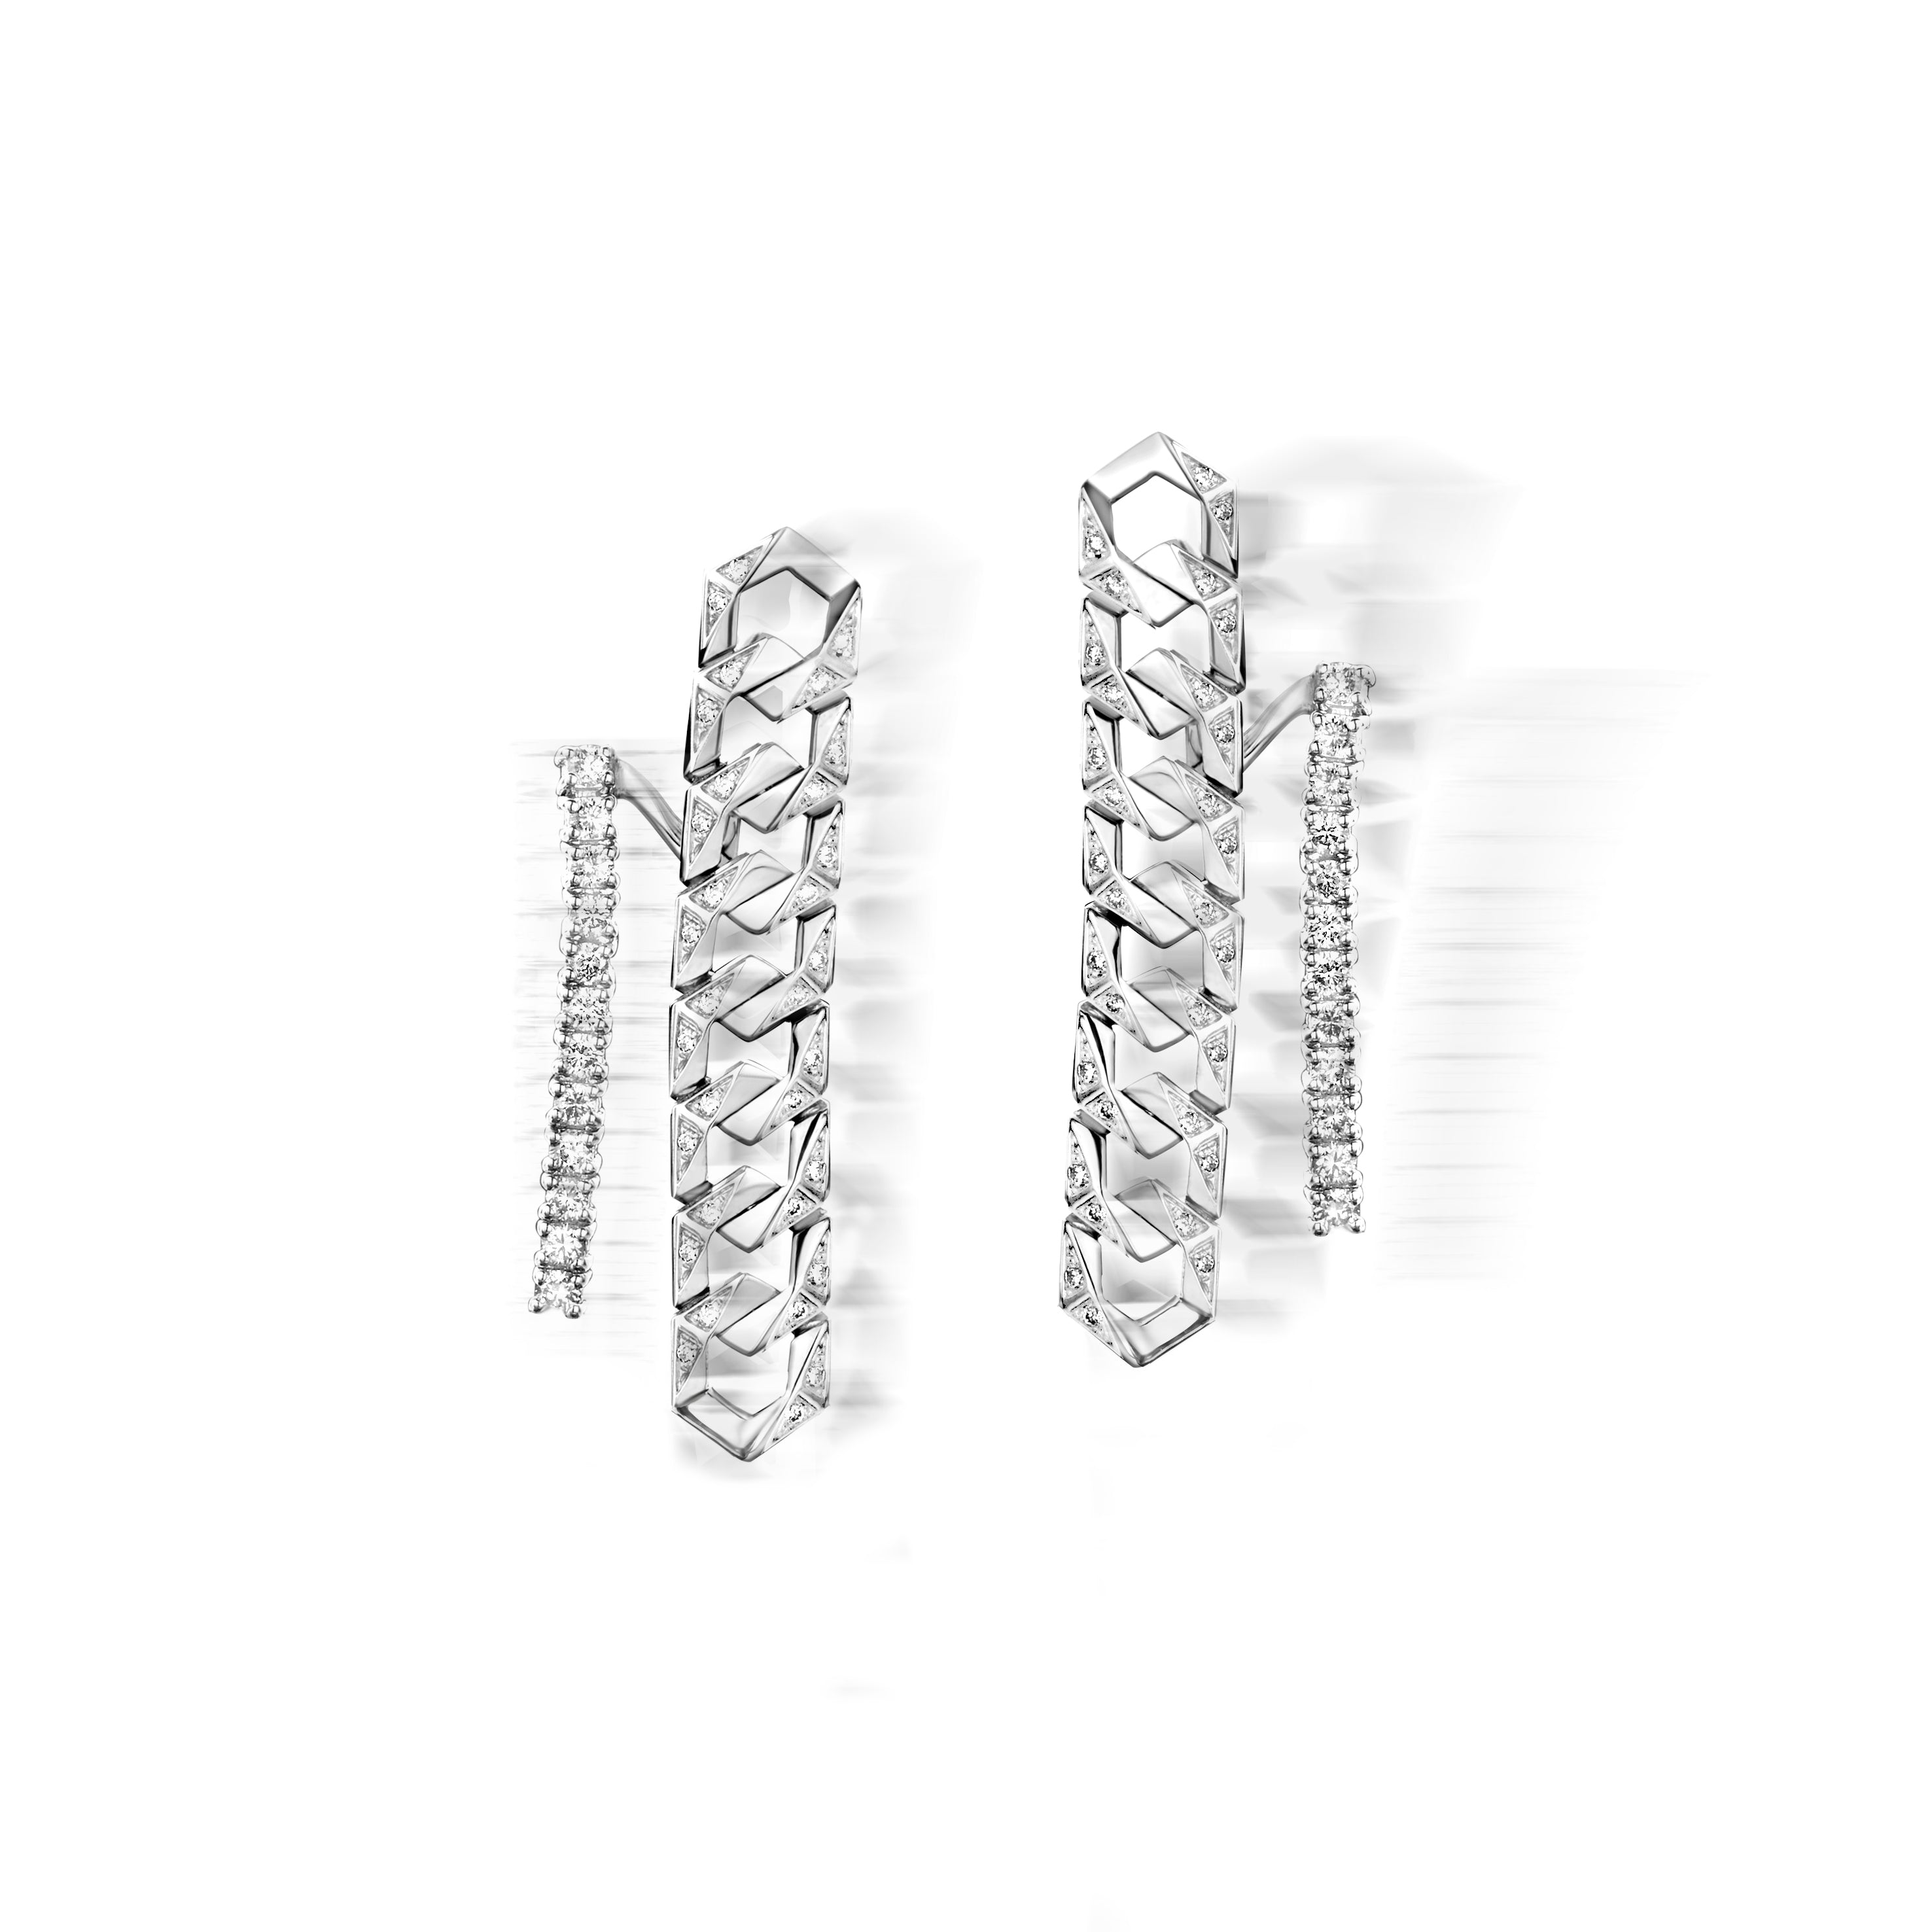 BOND SIGNATURE IV EARRINGS IN WHITE GOLD WITH WHITE DIAMONDS